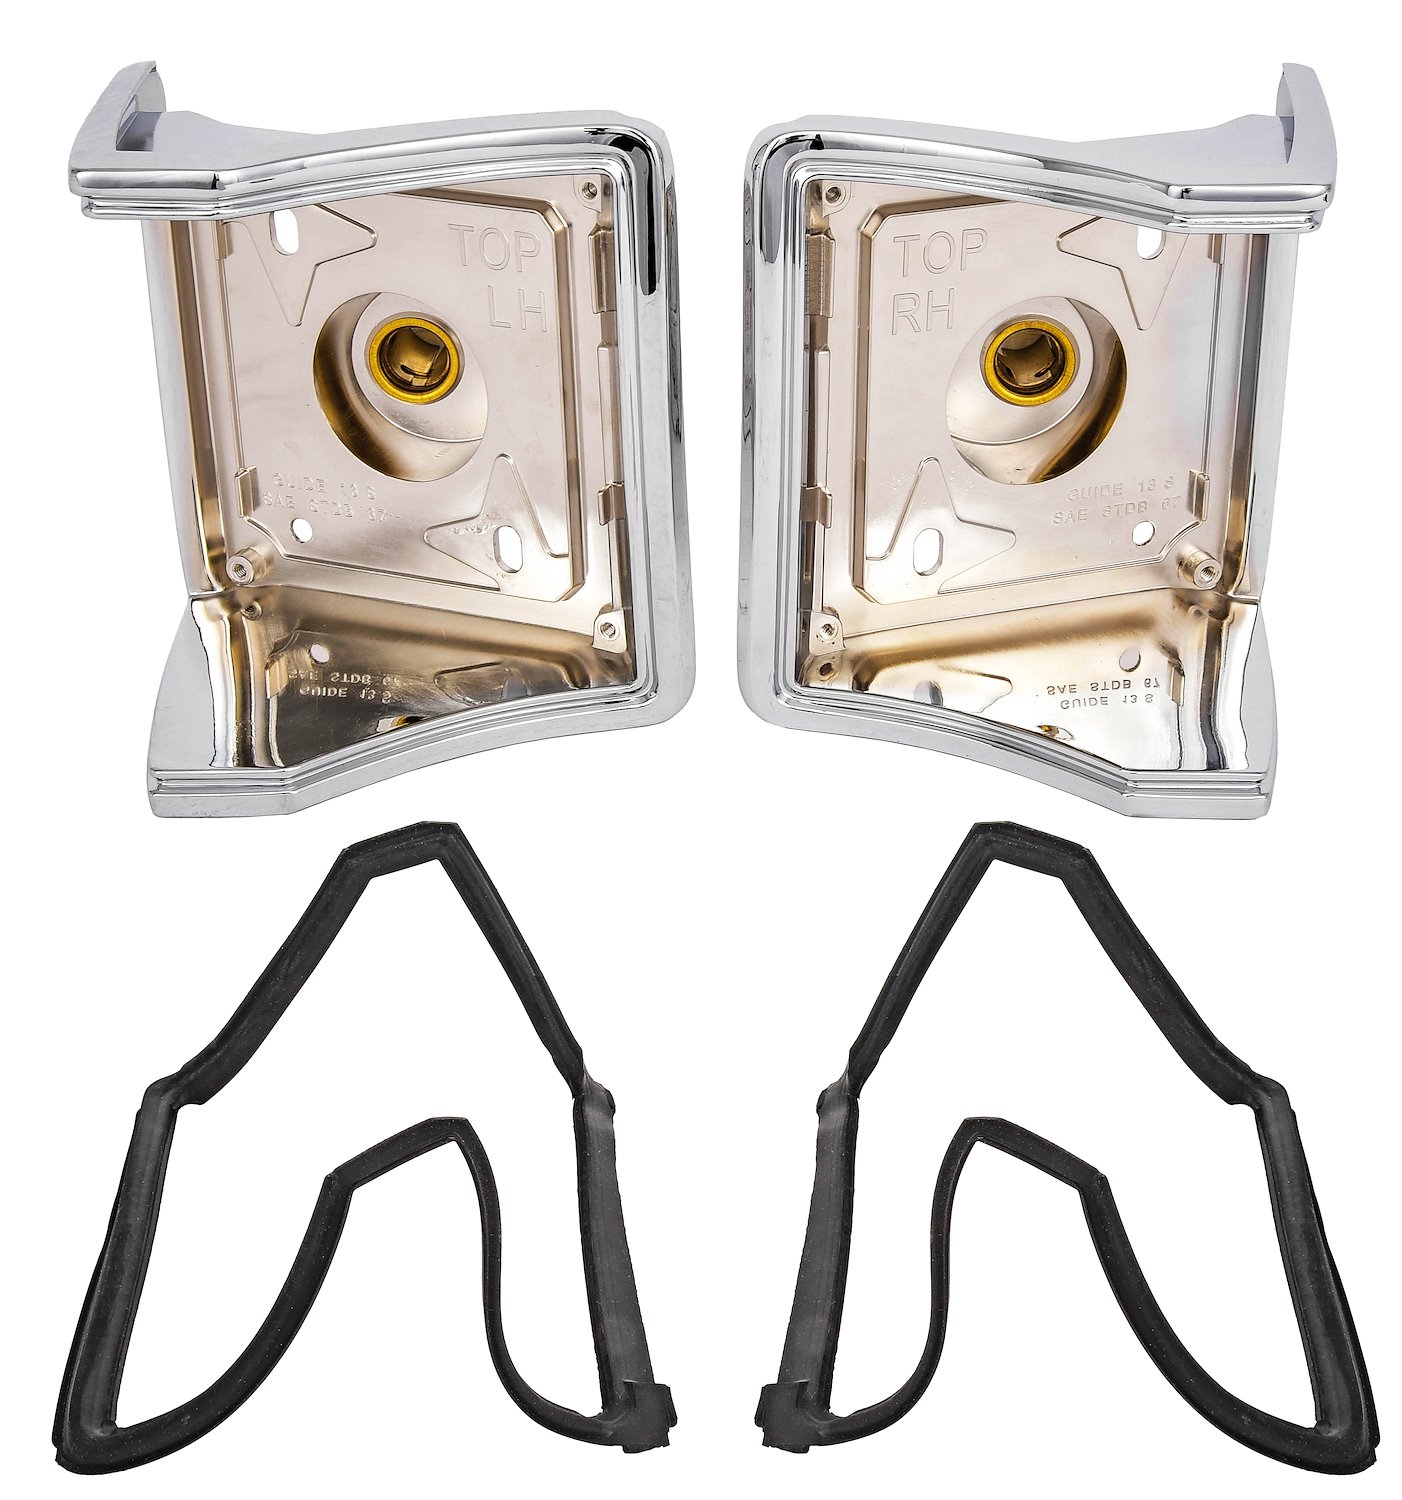 Tail Light Housings for 1967 Chevrolet Chevelle Station Wagon, El Camino